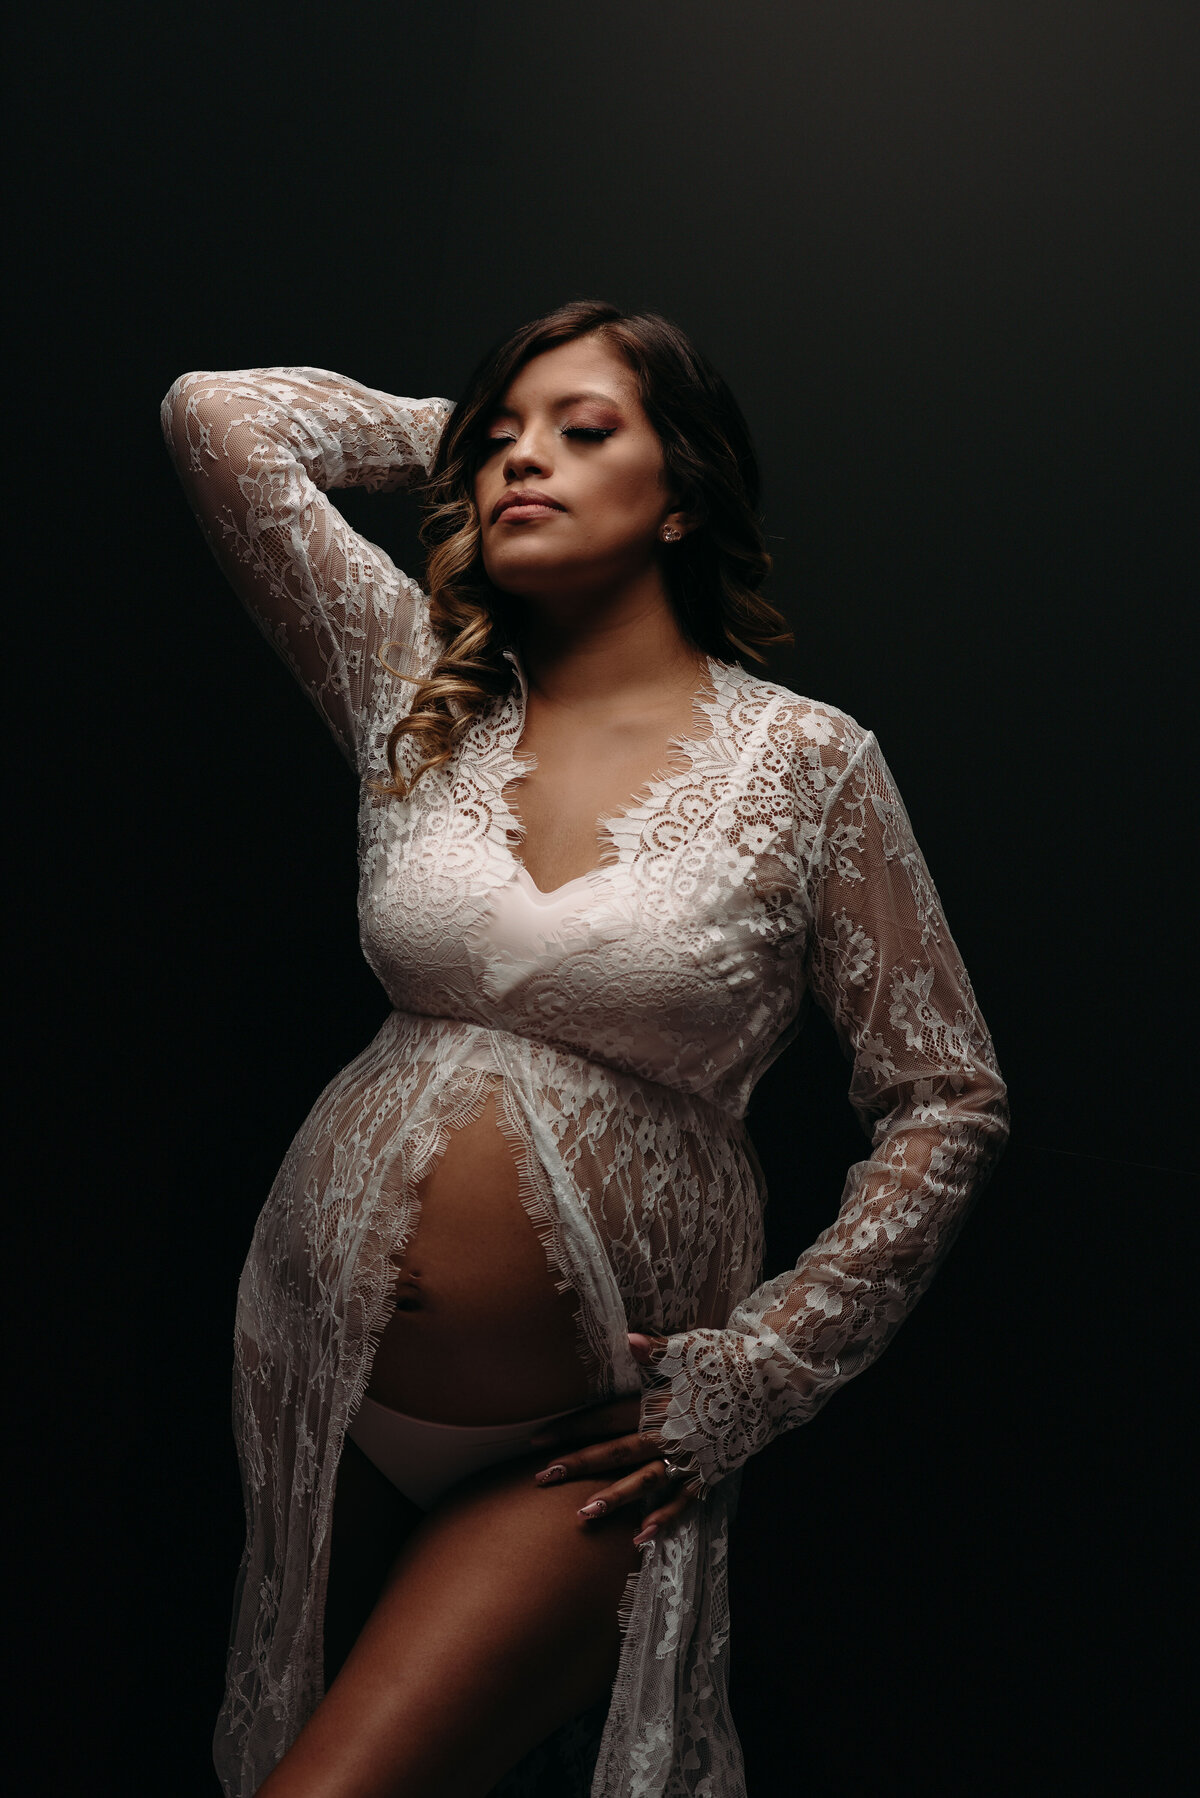 35 weeks pregnant woman wearing open lacy dress posing with one leg up and holding one hand on baby bump and other hand behind her head on black background